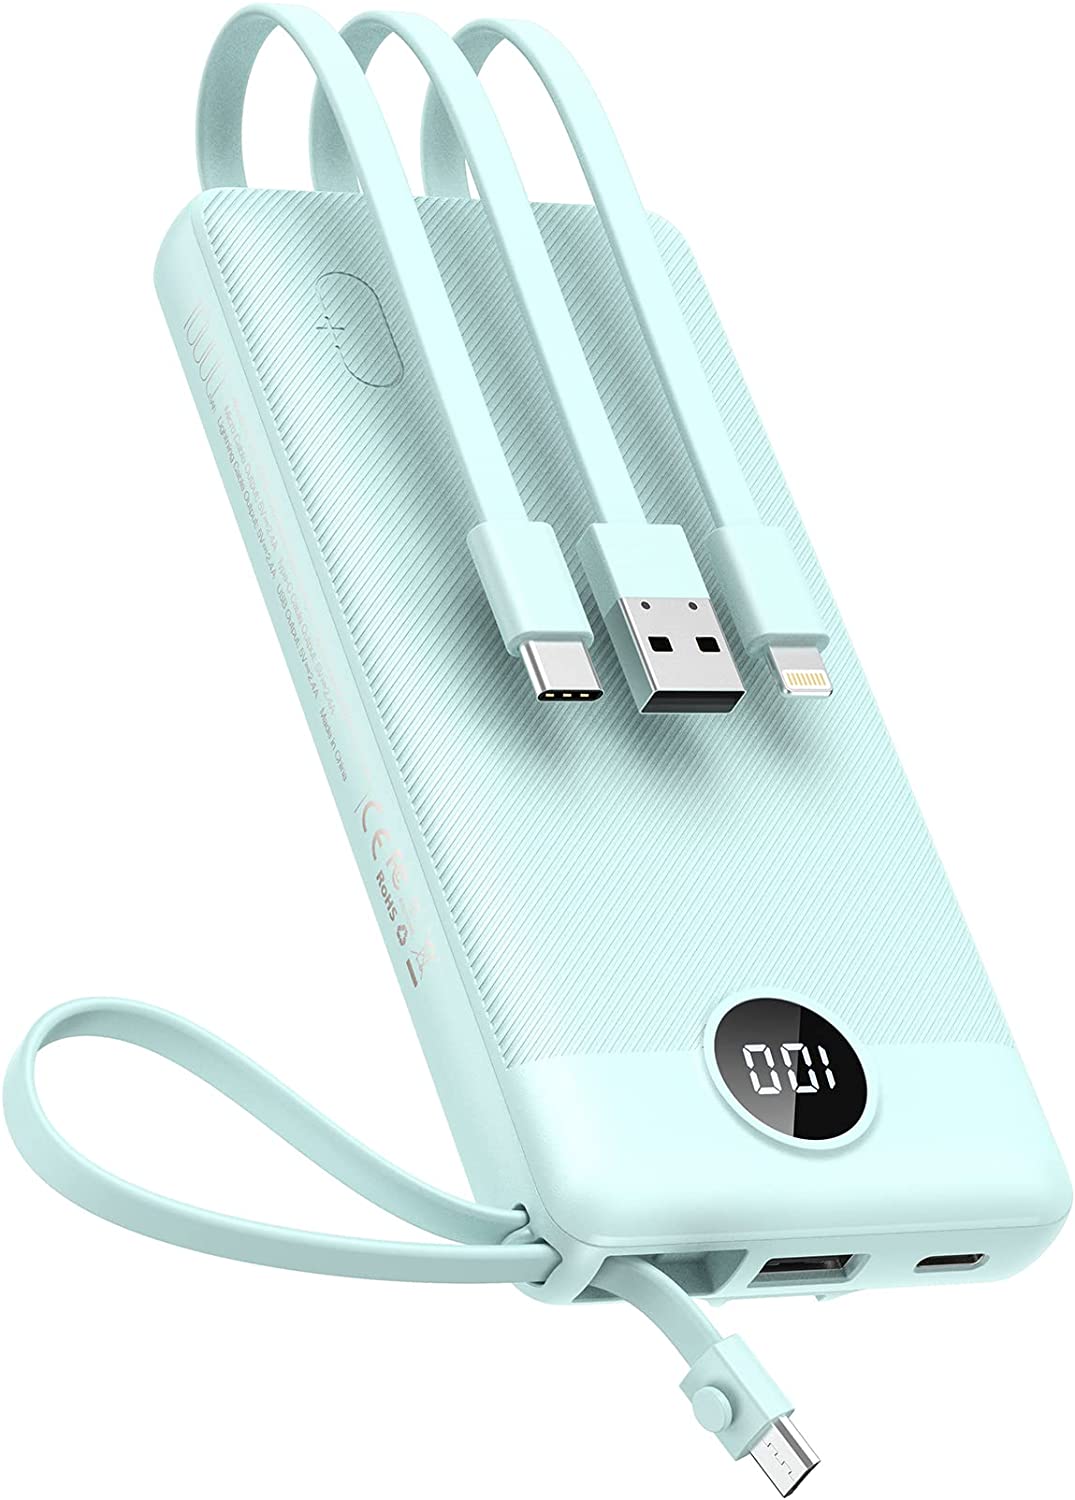 Blue portable phone charger 